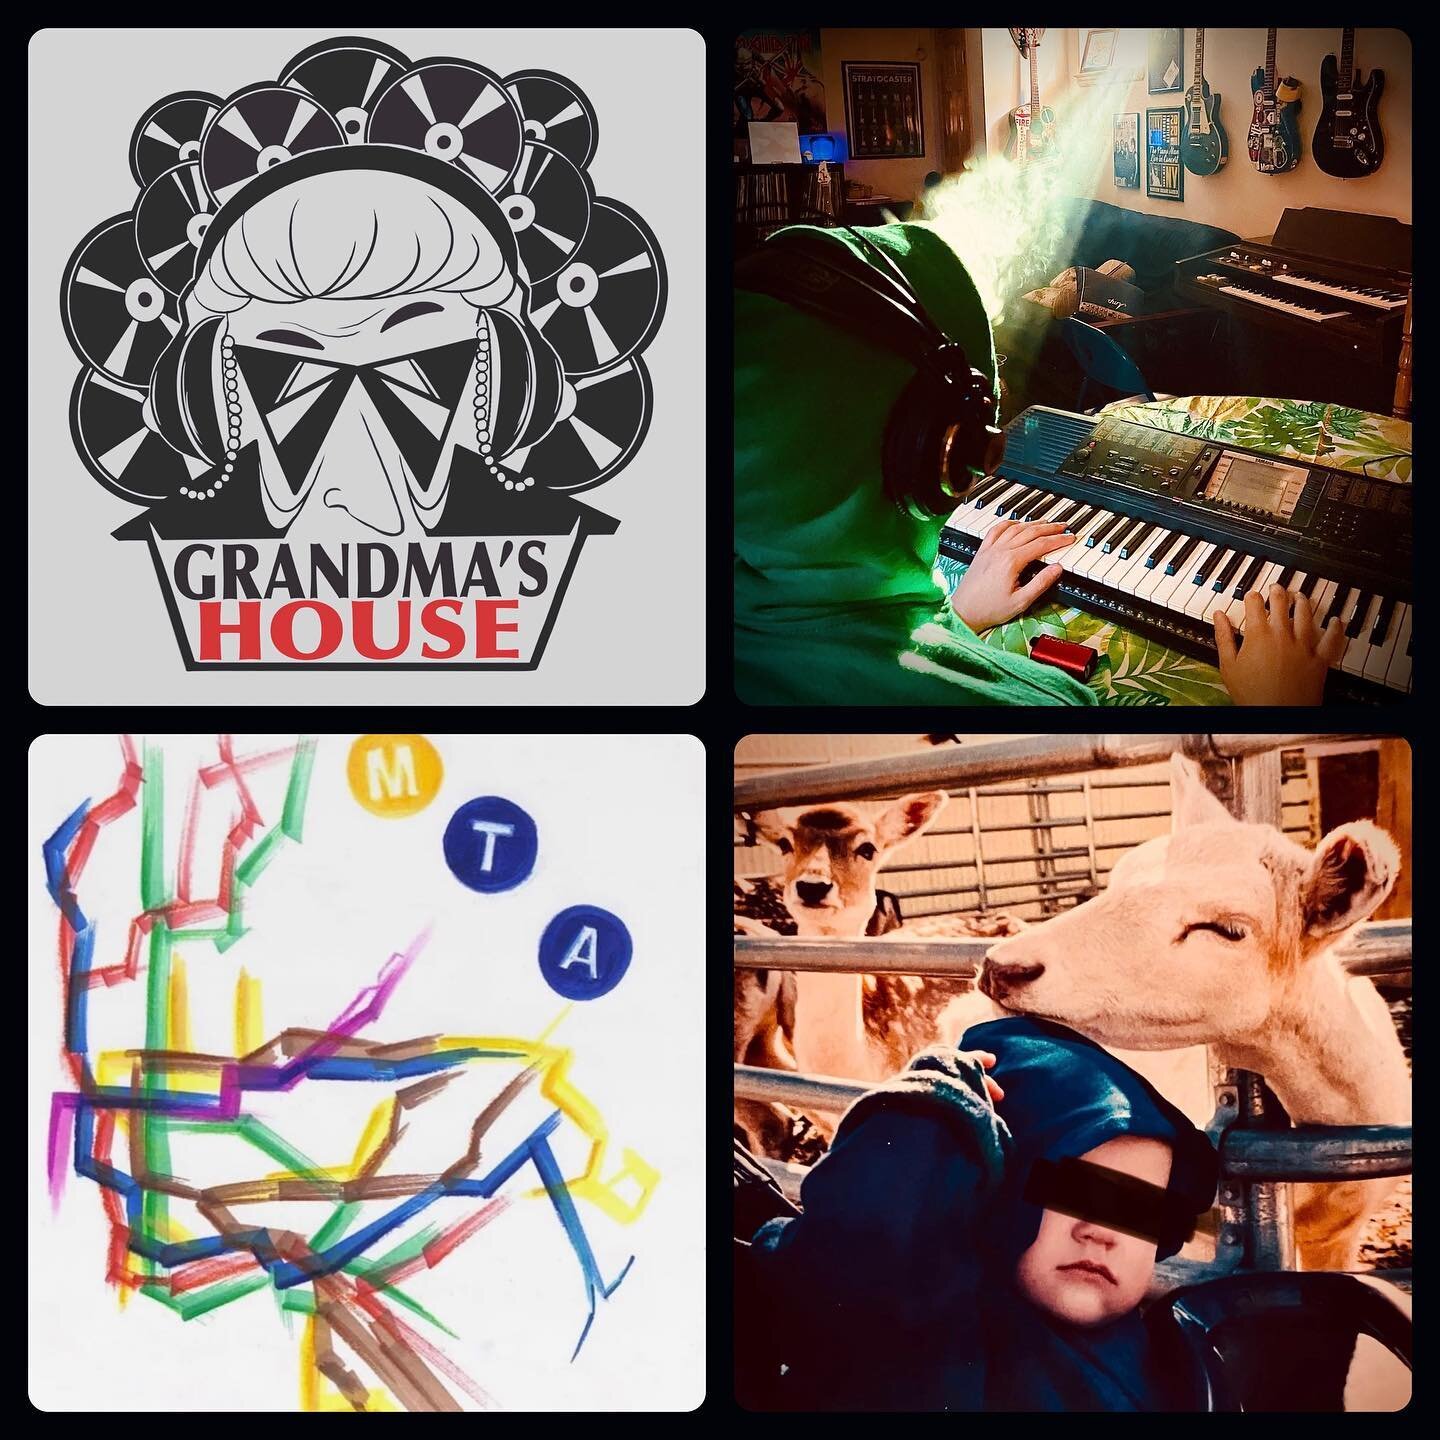 Please check out these new releases from some of our artists!!!

Current releases under Grandma's House:
Someone Else's Brain (Single) - @rivalthreatband
MTA (Single) - @linestheparallel
Deer You (EP) - Jerbear @jeremydirzis

Be sure to give us a fol